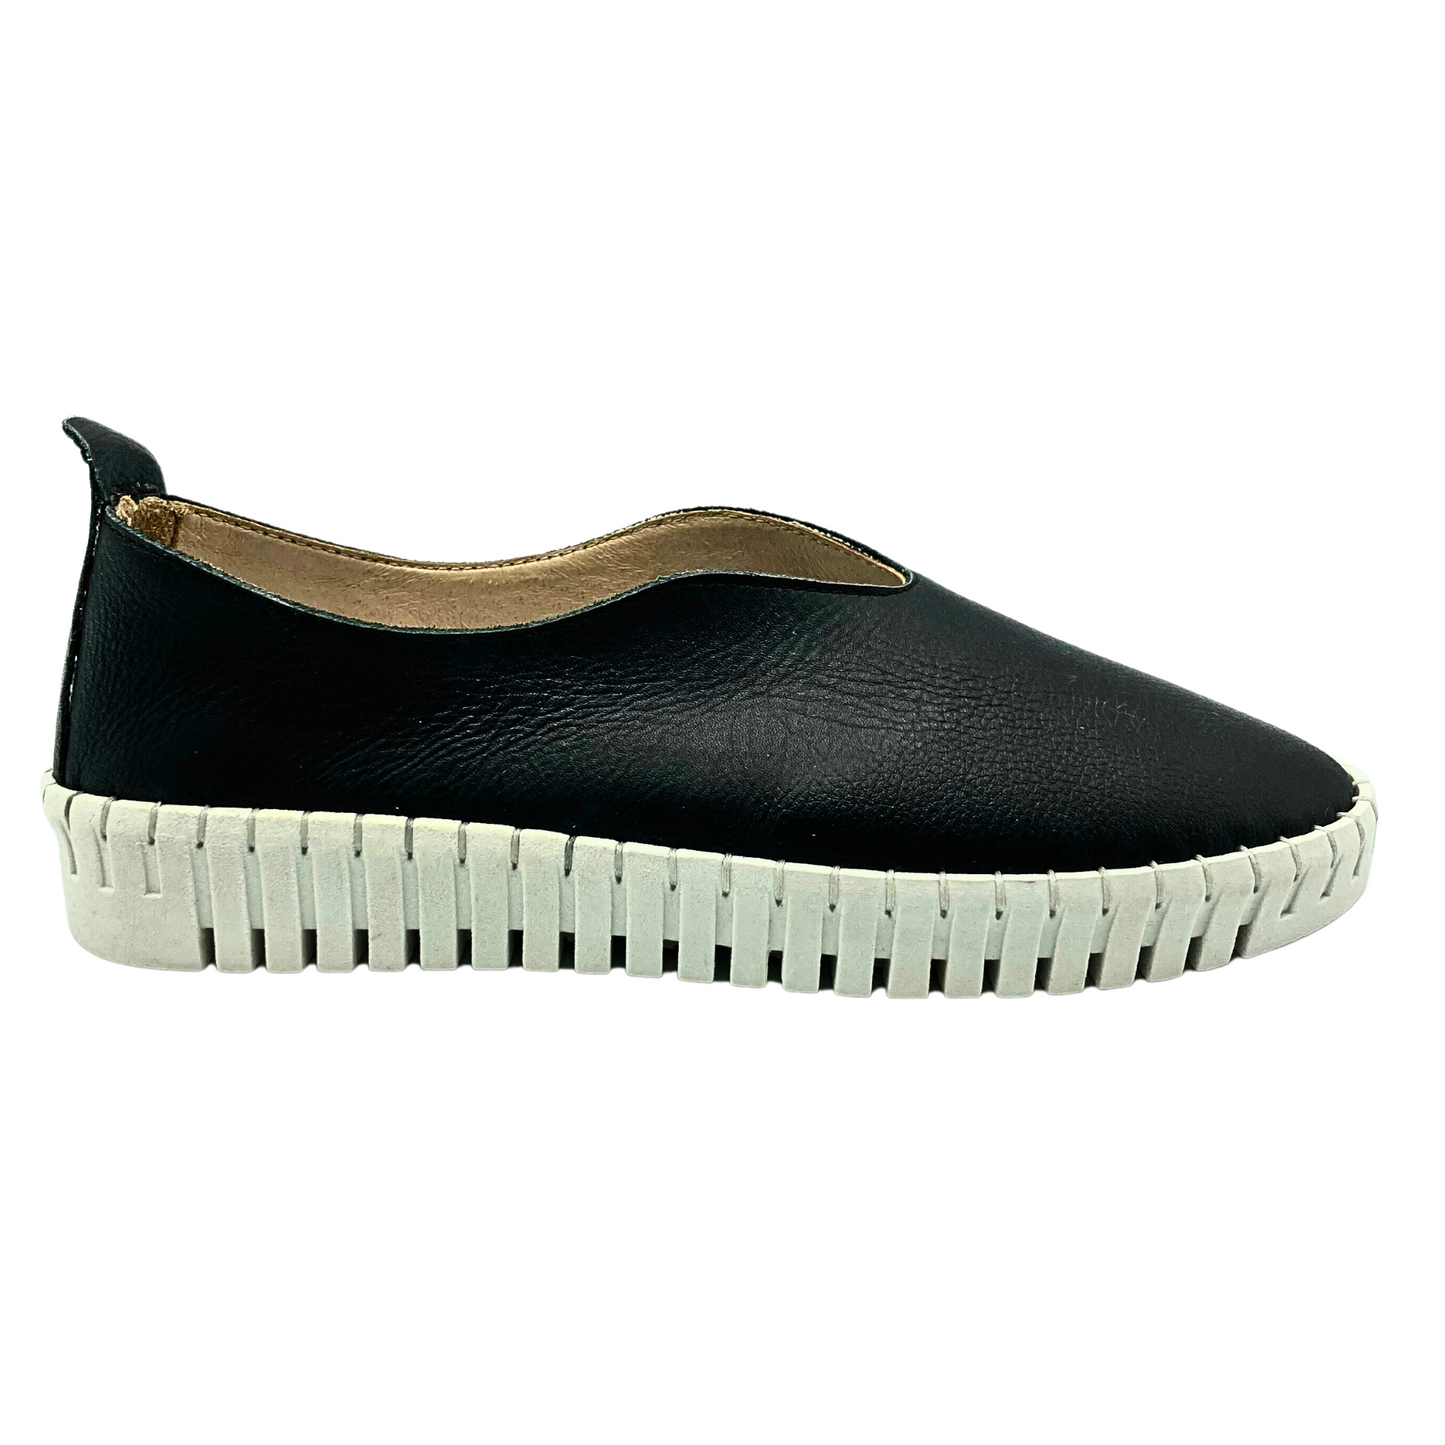 Outside angle view of the Ateliers Bindi a slip on black leather sneaker with white rubber sole